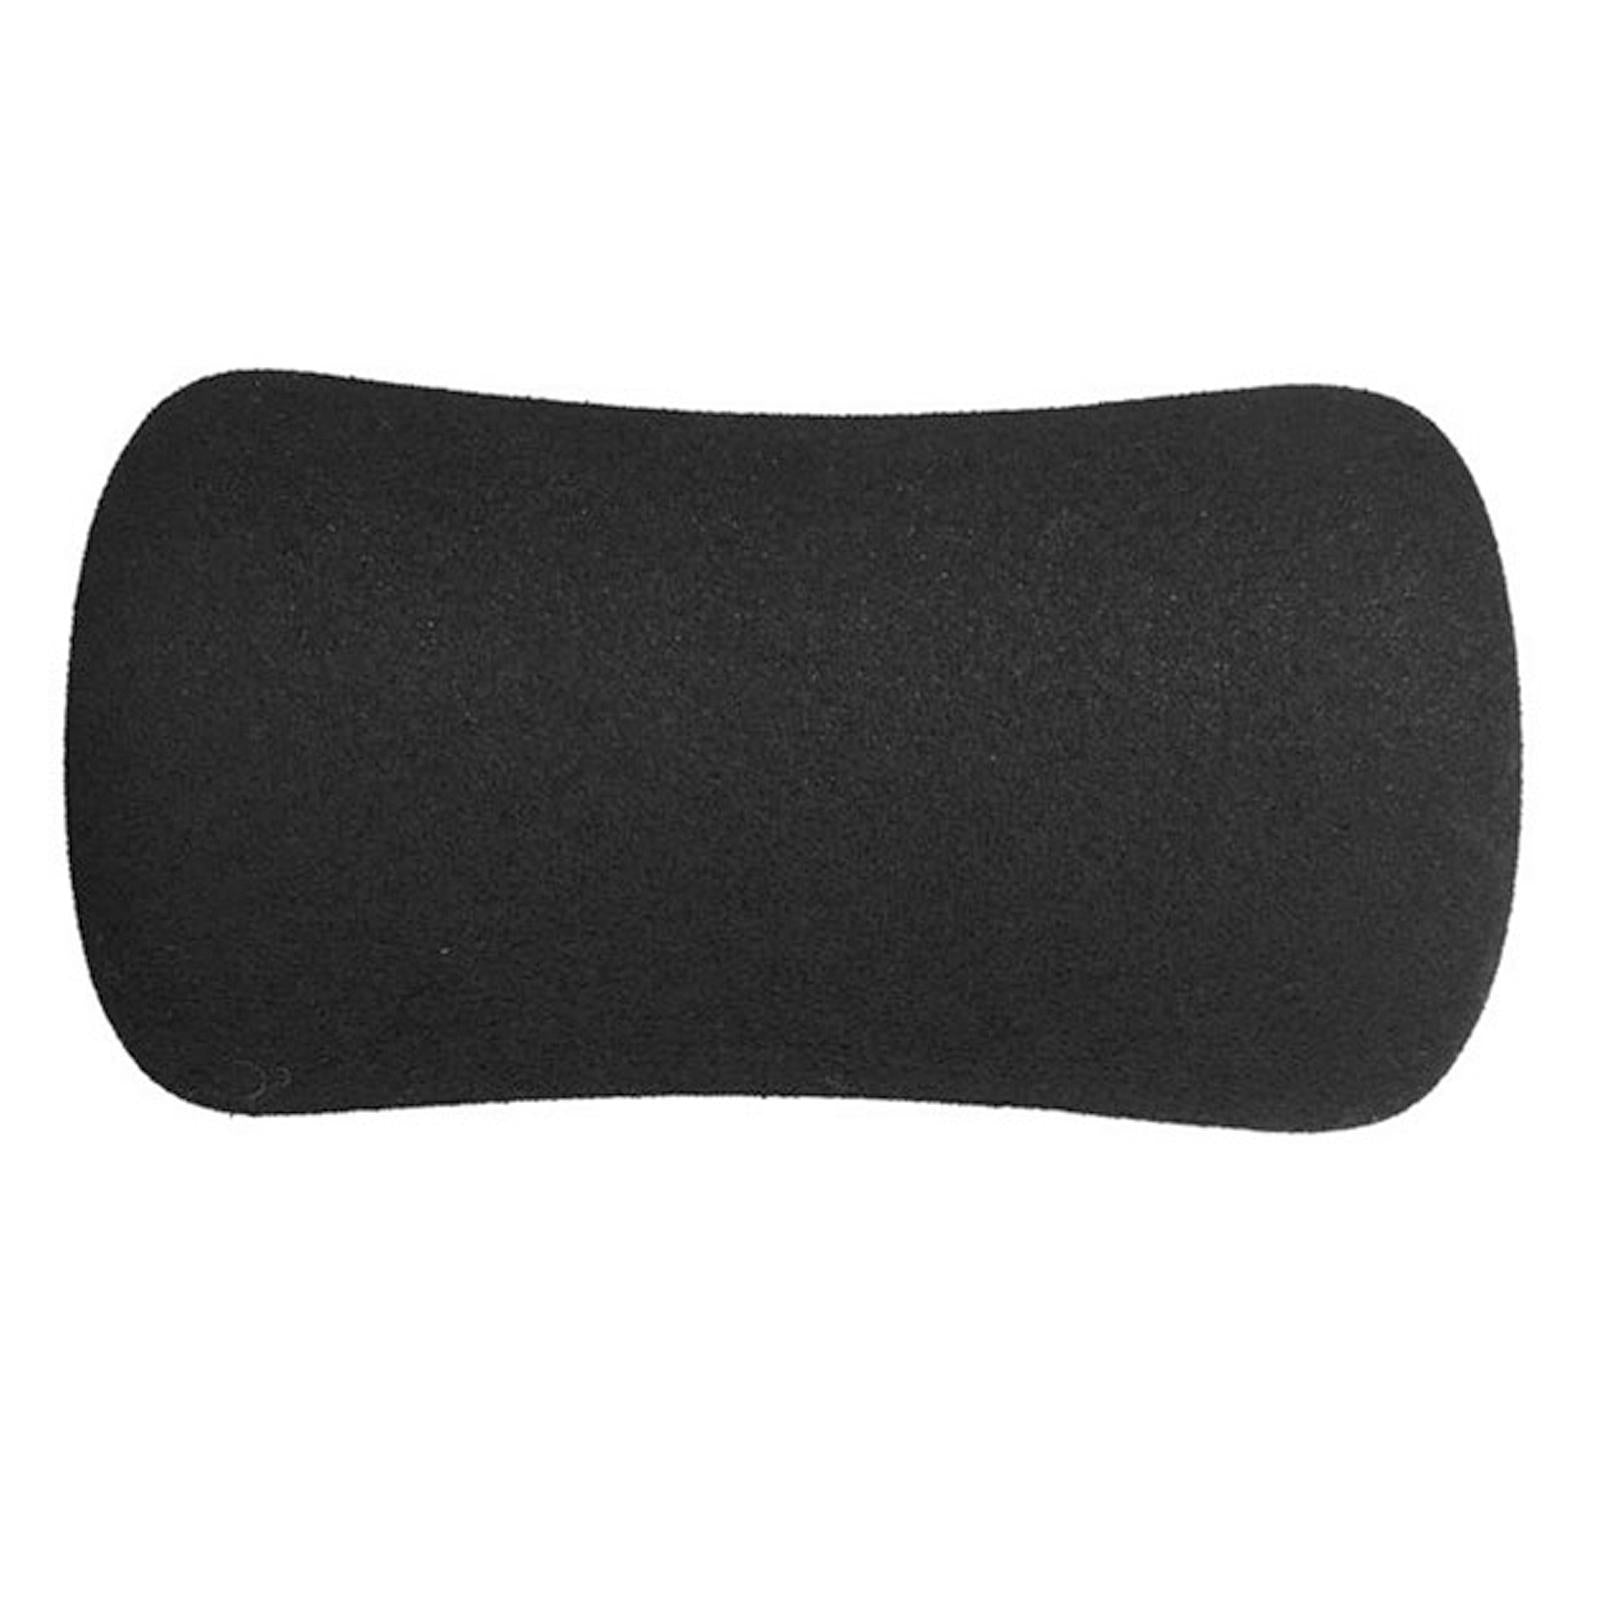 1 Pack Foam Grips for Home Gym Sit up Bar Machines Exercise Core Strength 16cm